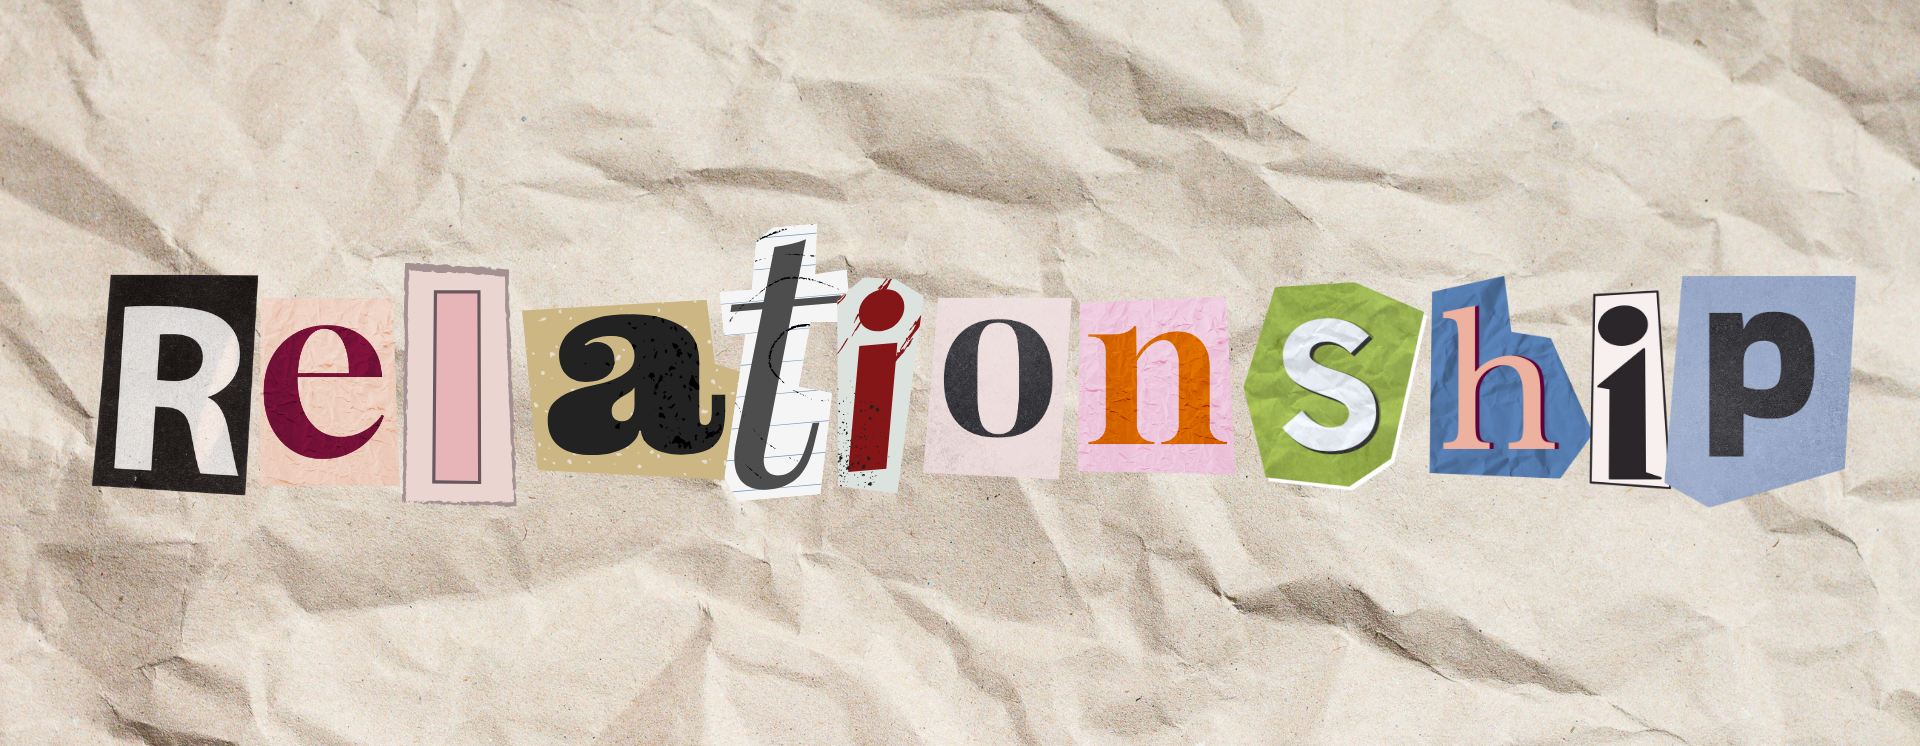 Cut-out letters on crumpled paper spell &#x27;Relationship&#x27;